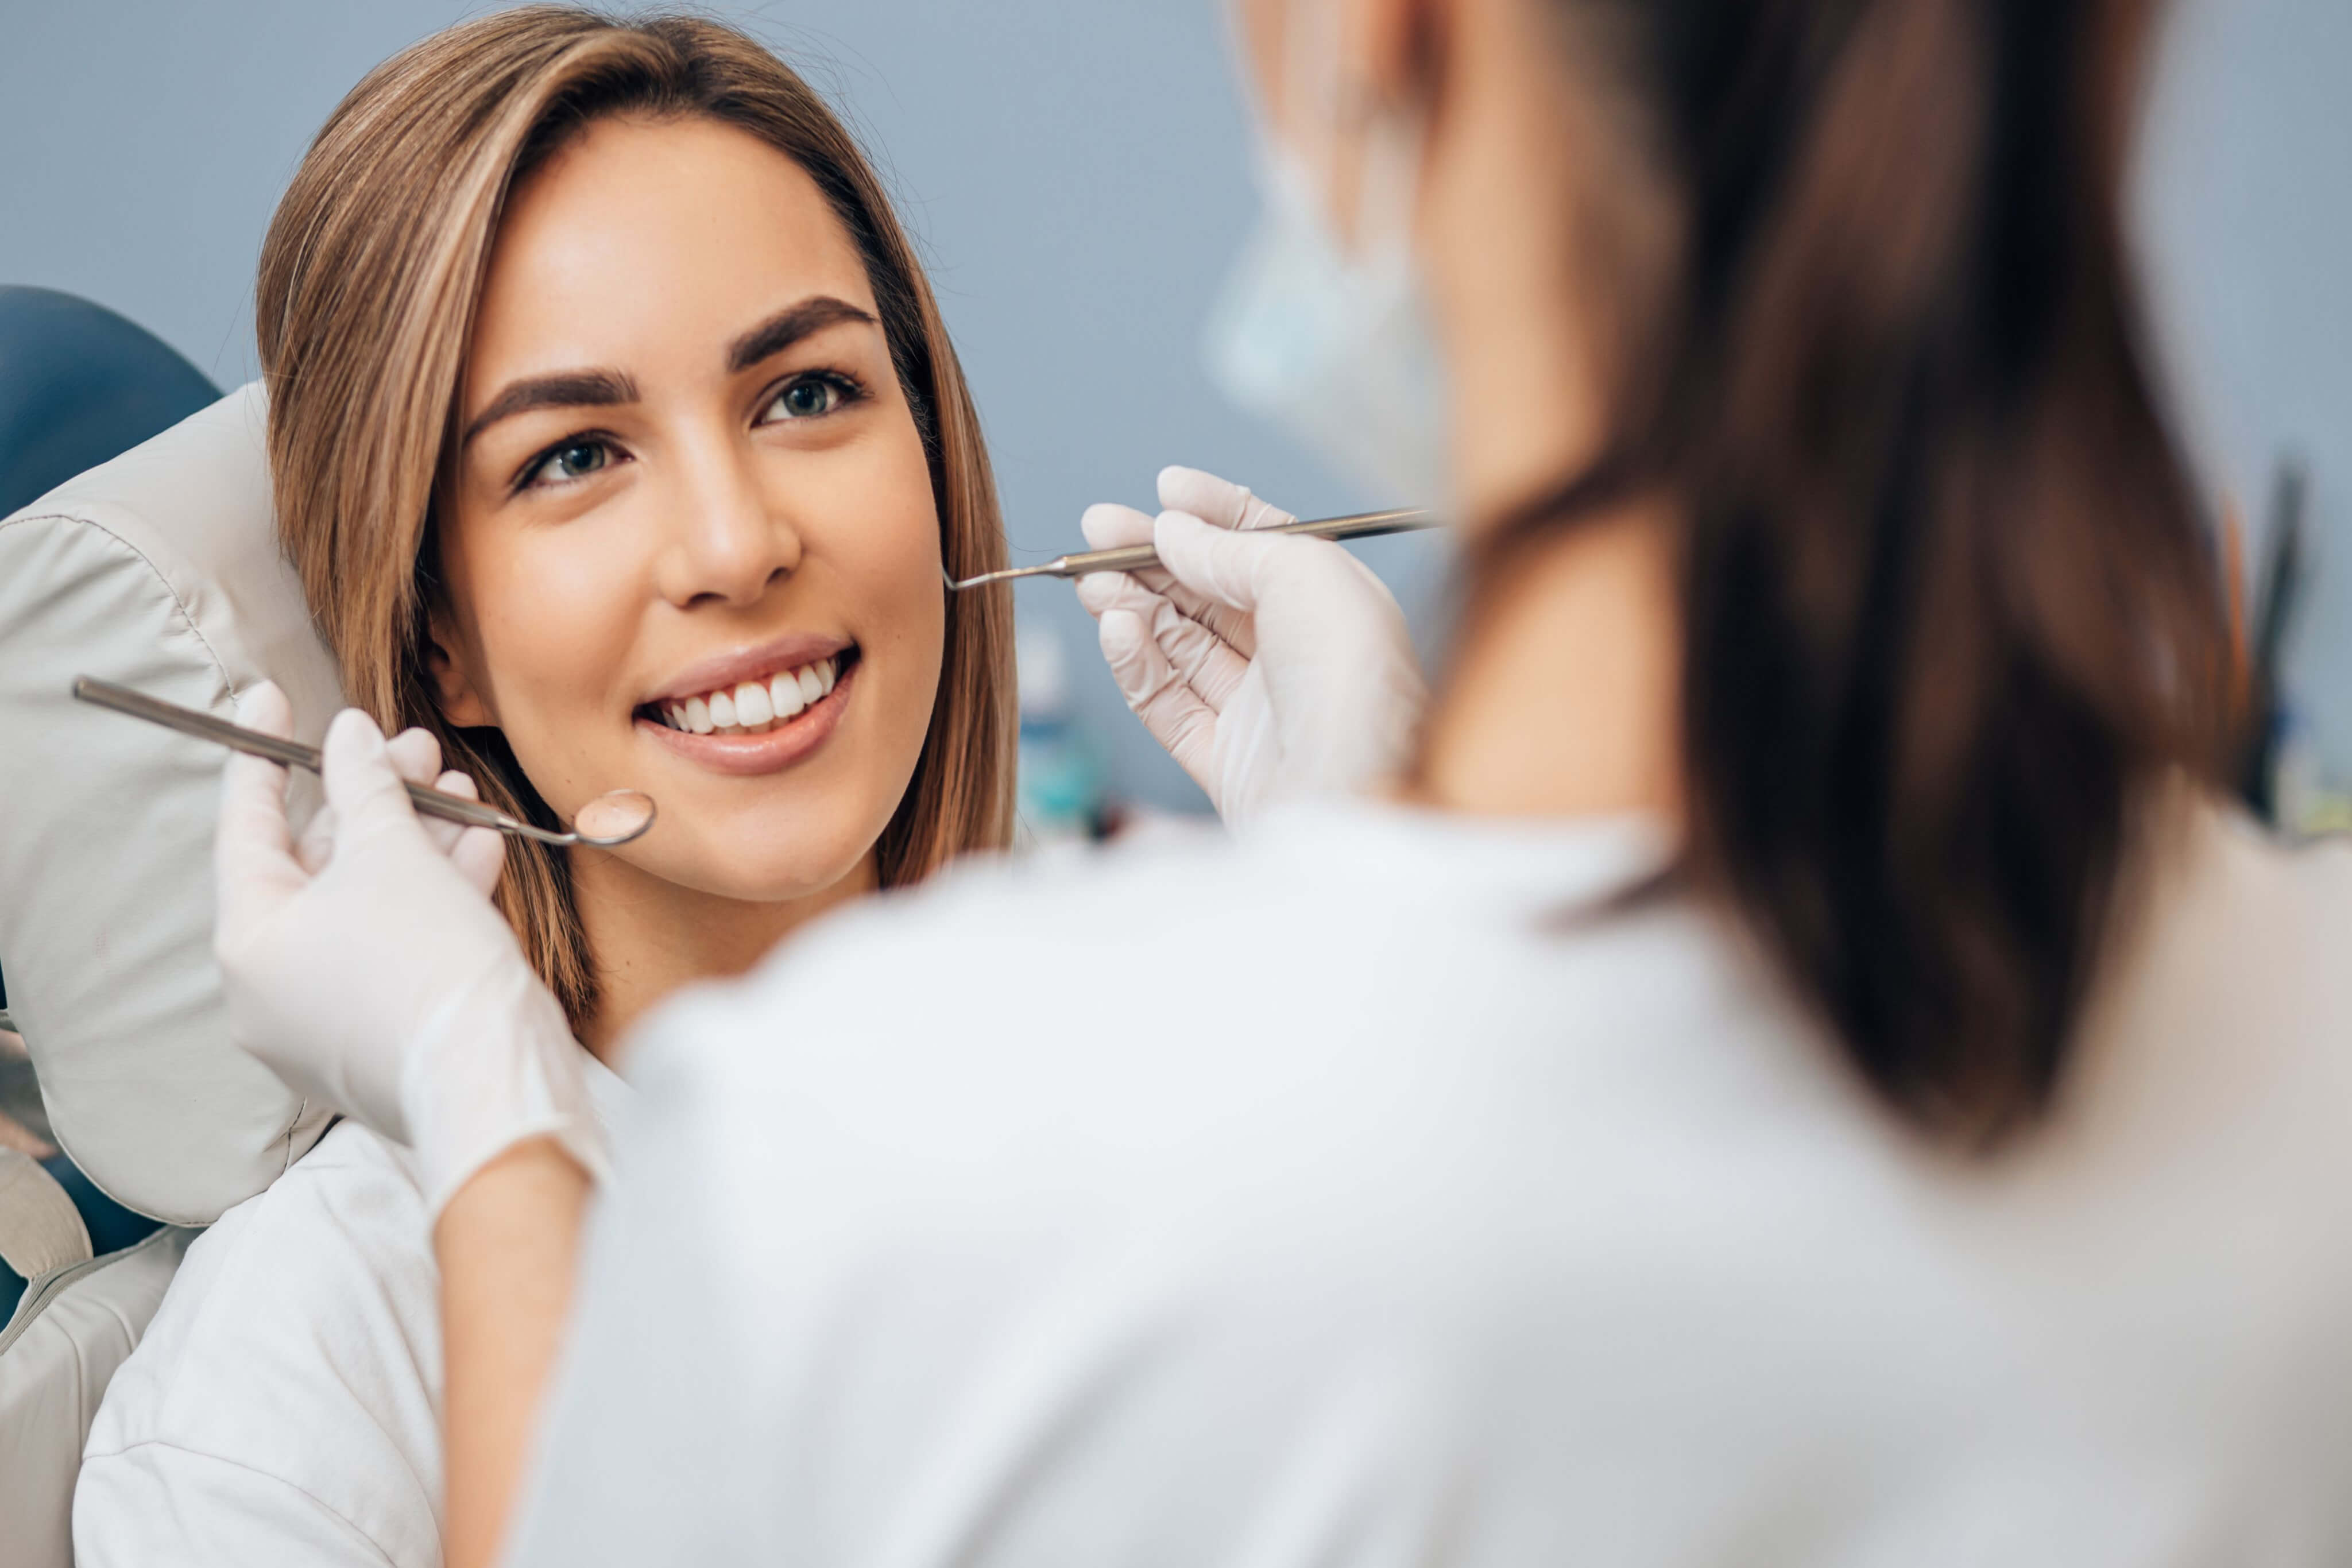 cosmetic dentist training for dentists looking to enhance their client's face